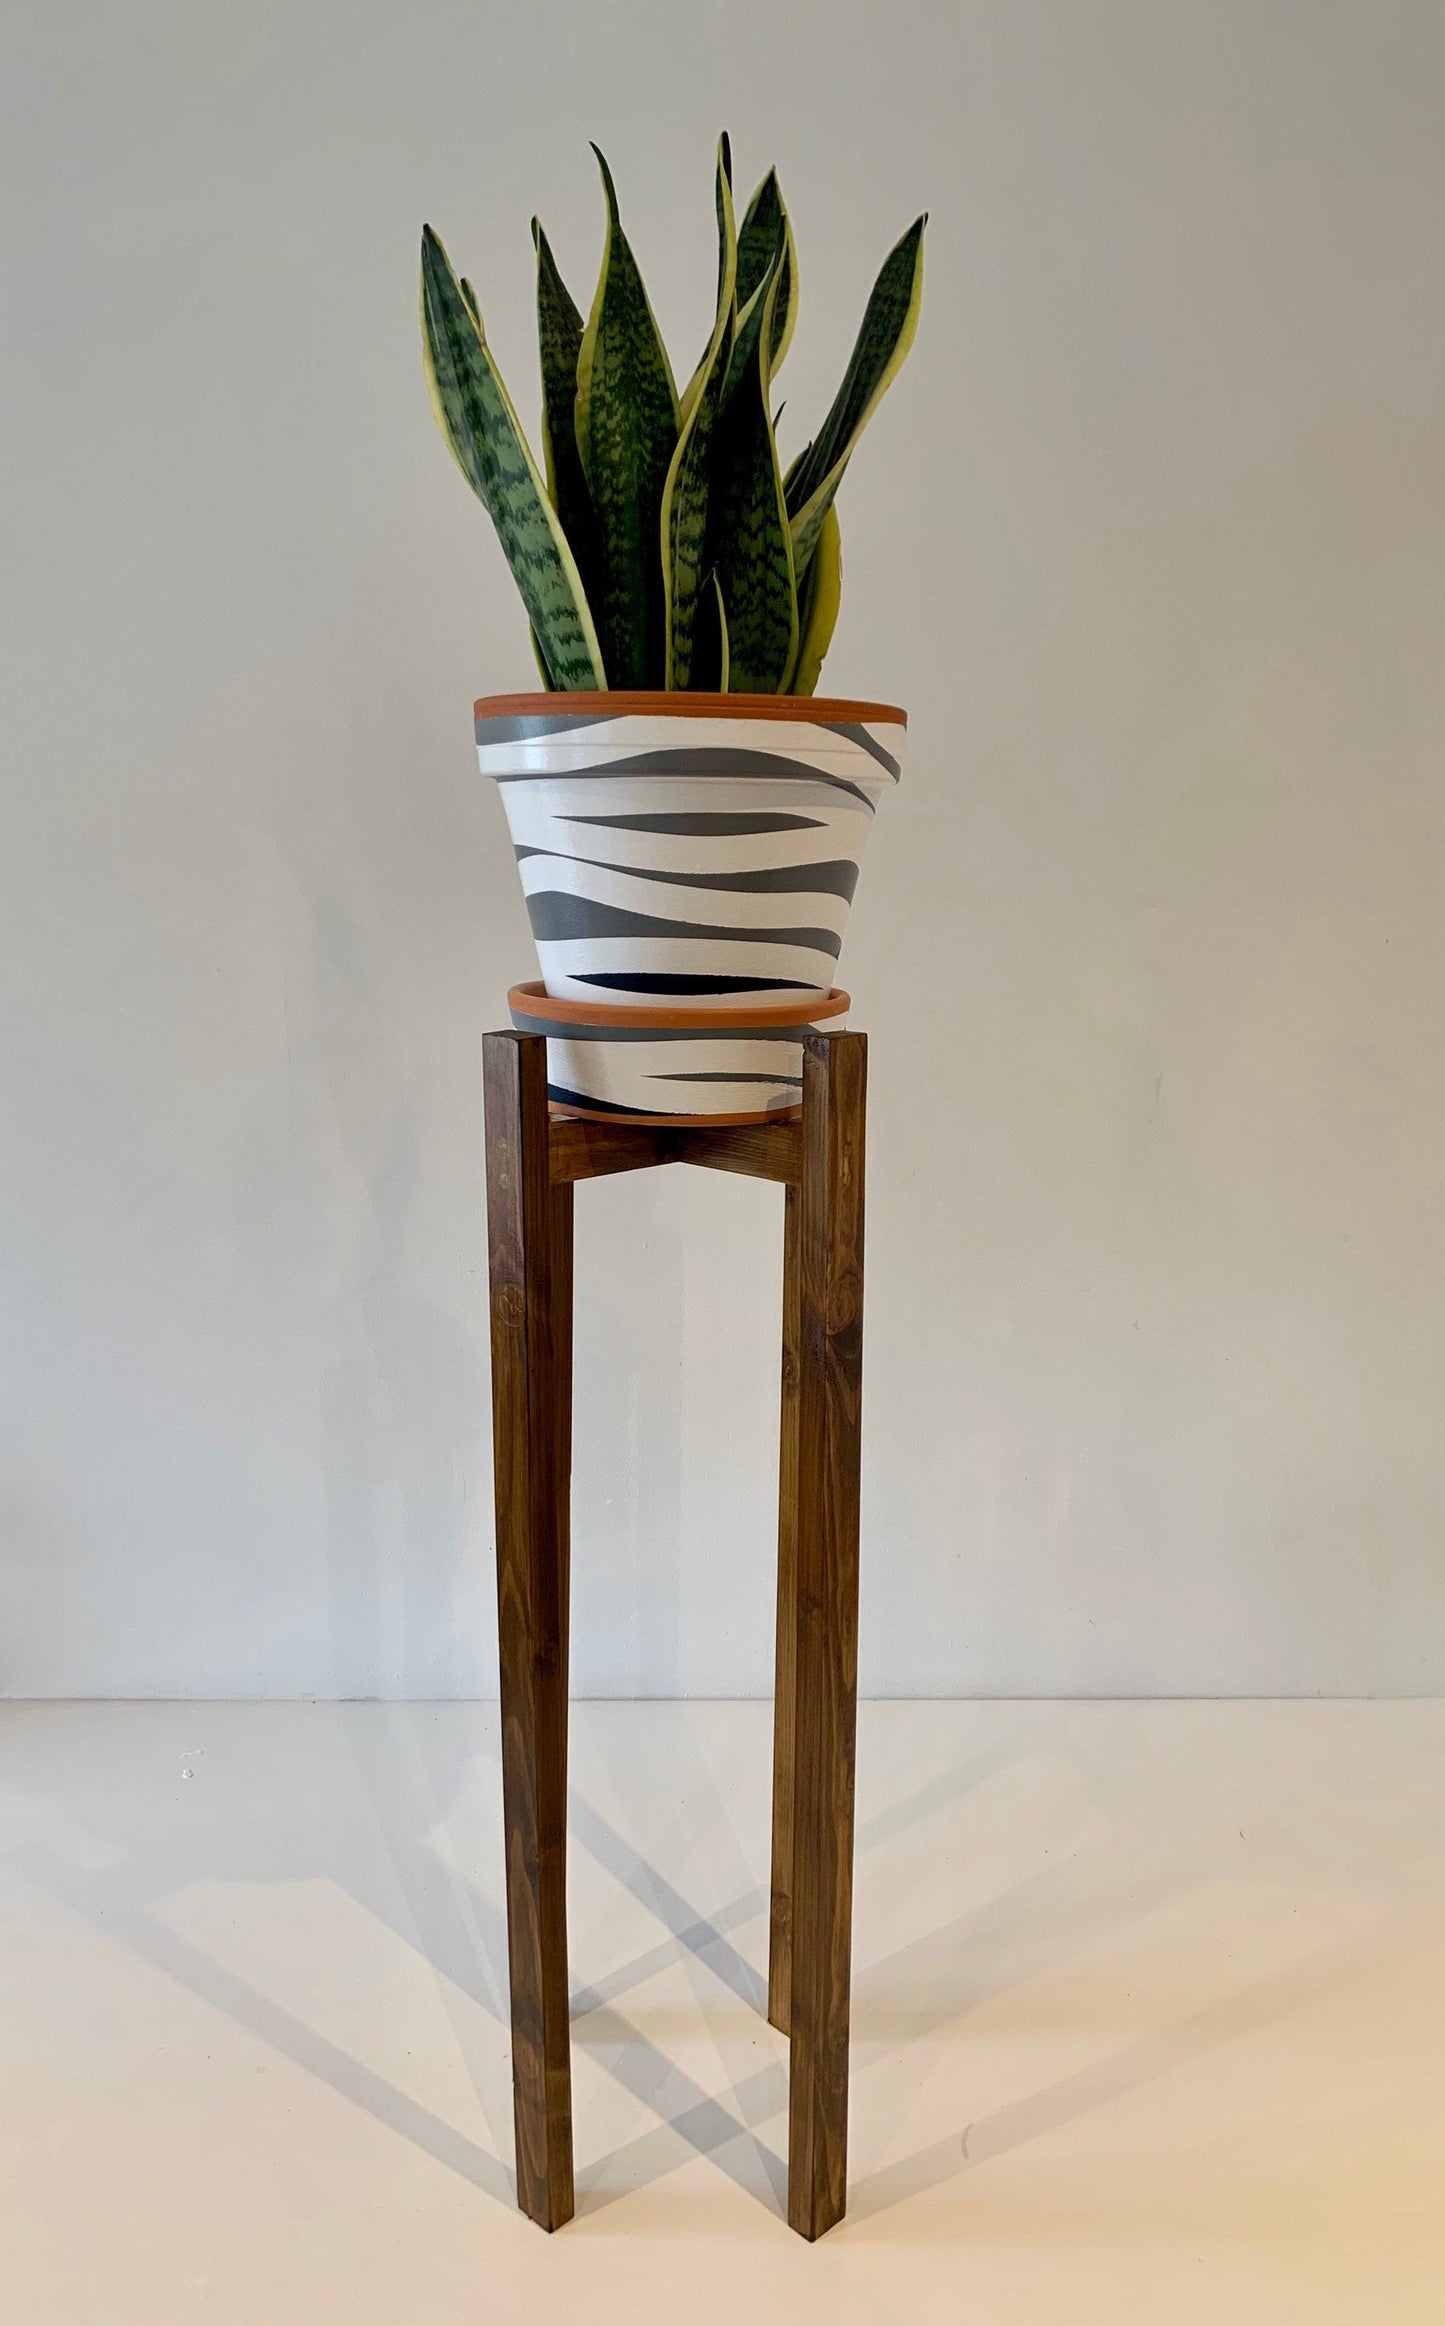 Medium size Slim Leg Plant Pot Stand from 50 to 60 cm High Hand made in UK